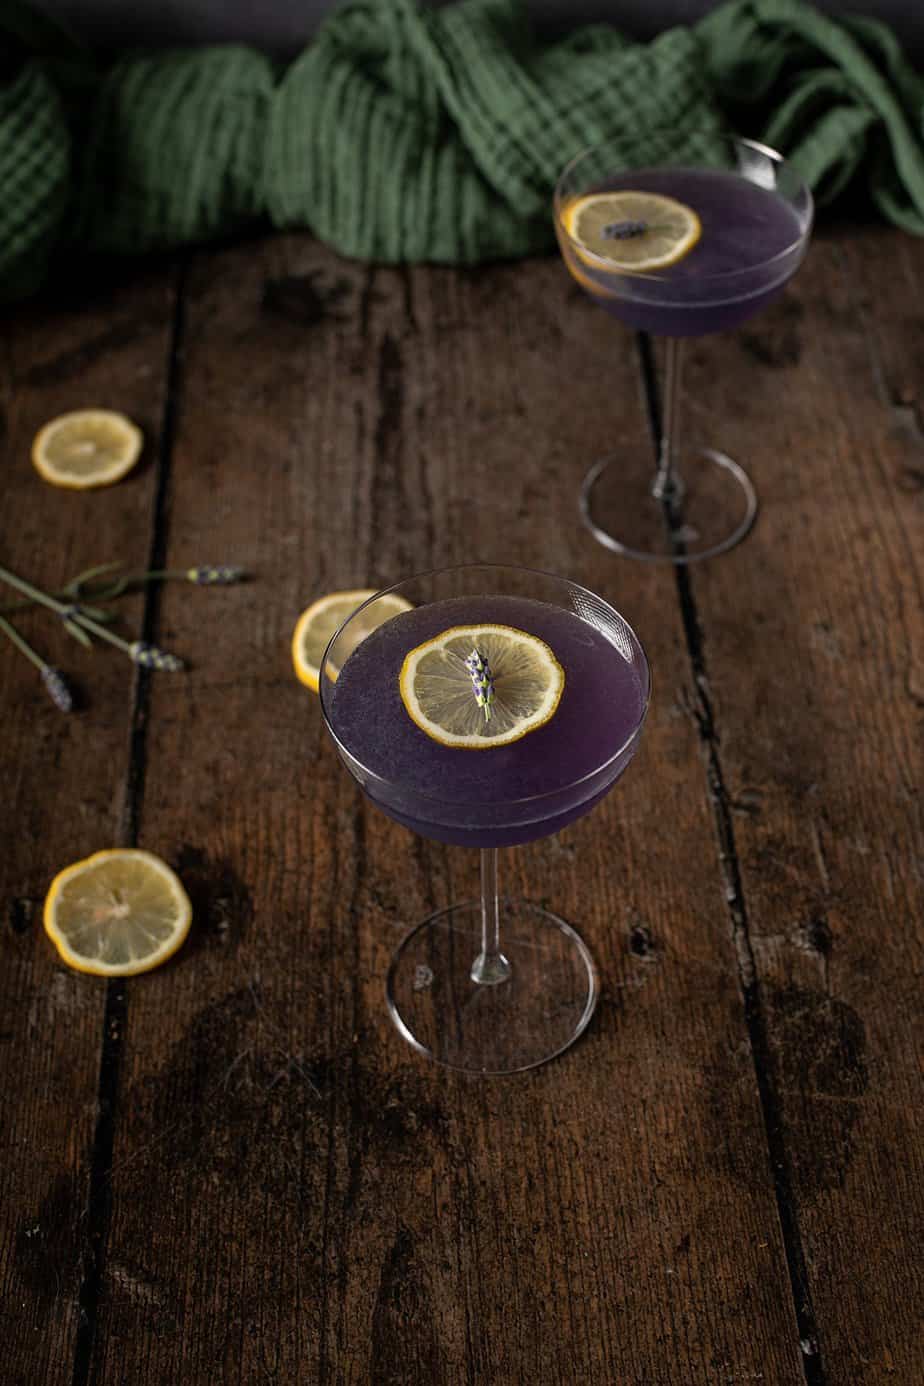 45 degree view of 2 coupe glasses full of lavender martinis